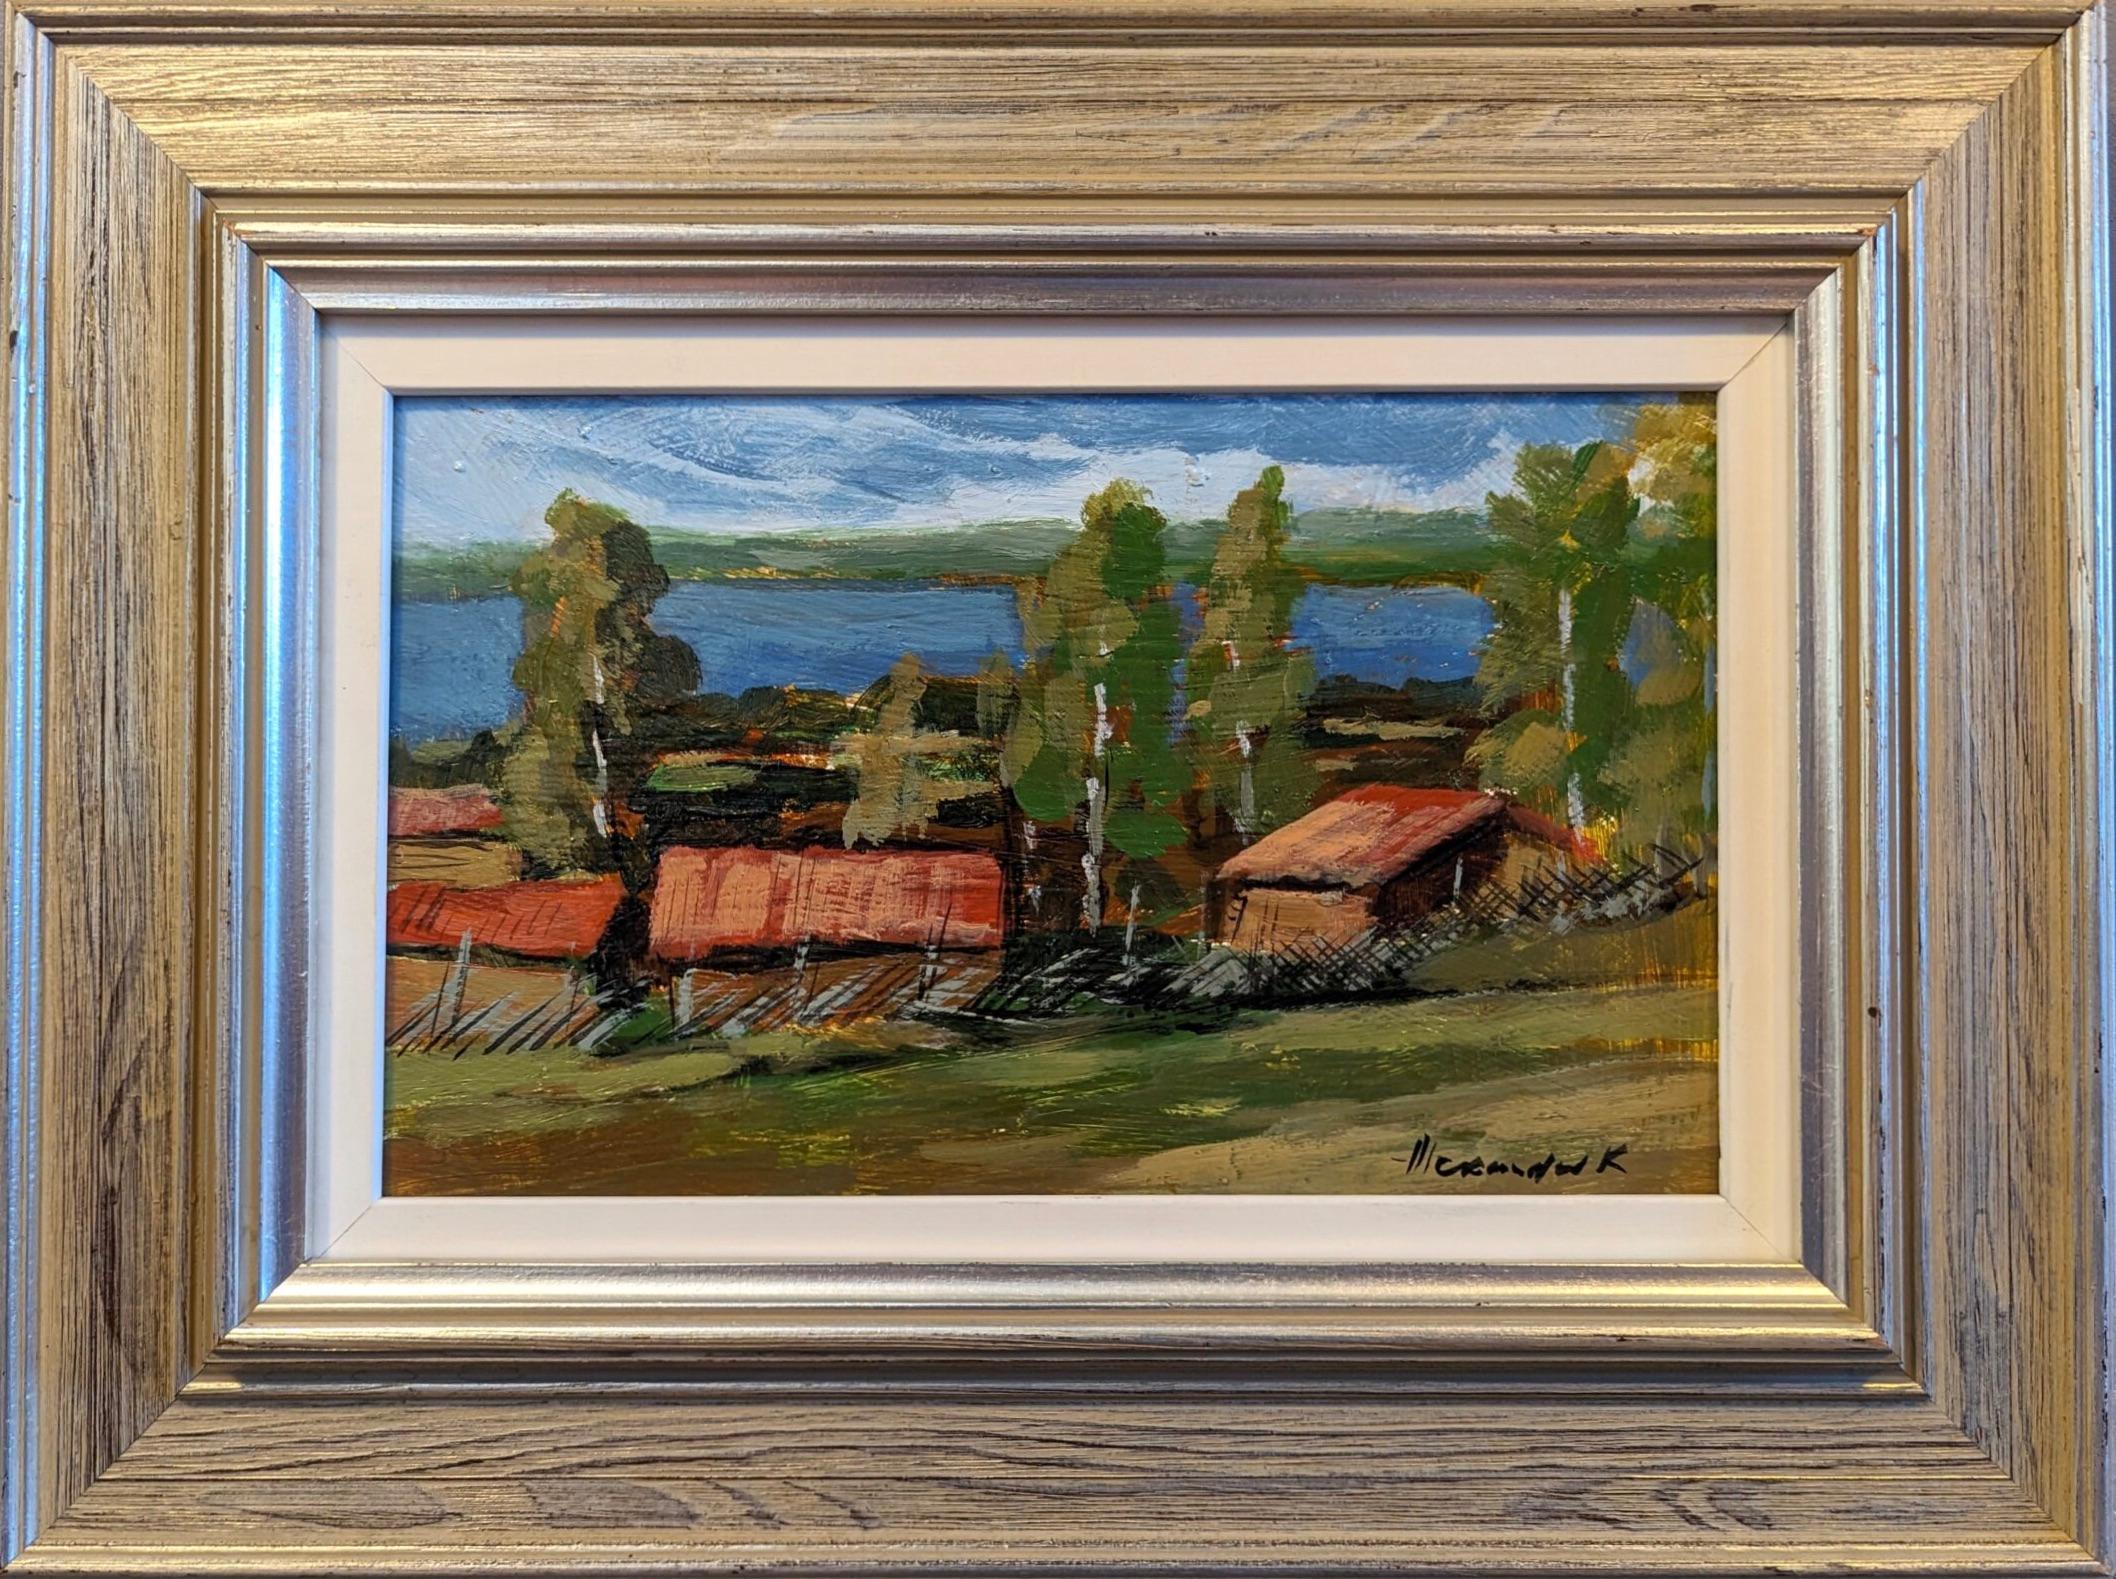 Unknown Landscape Painting - Vintage Mid-Century Modern Landscape Oil Painting - Red Houses in Nature